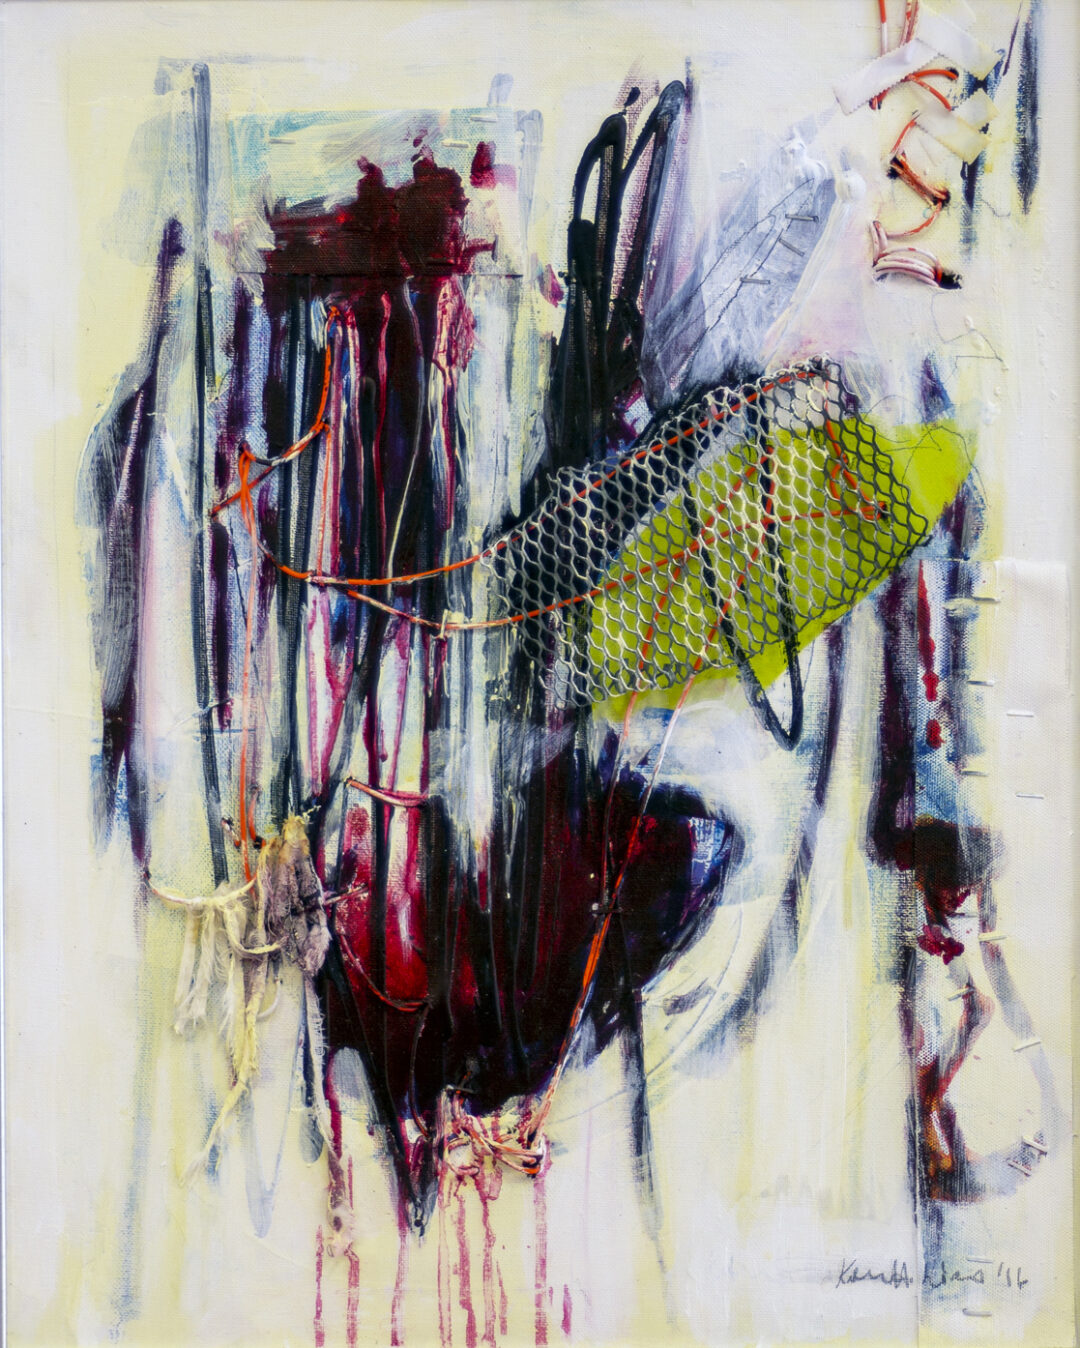 Kathleen Hurley Liao  “Broken Heart Surgery”, acrylic, iodine, medical tape, steel mesh, found wire, muslin and graphite, 24” H x  20W” – $500.00